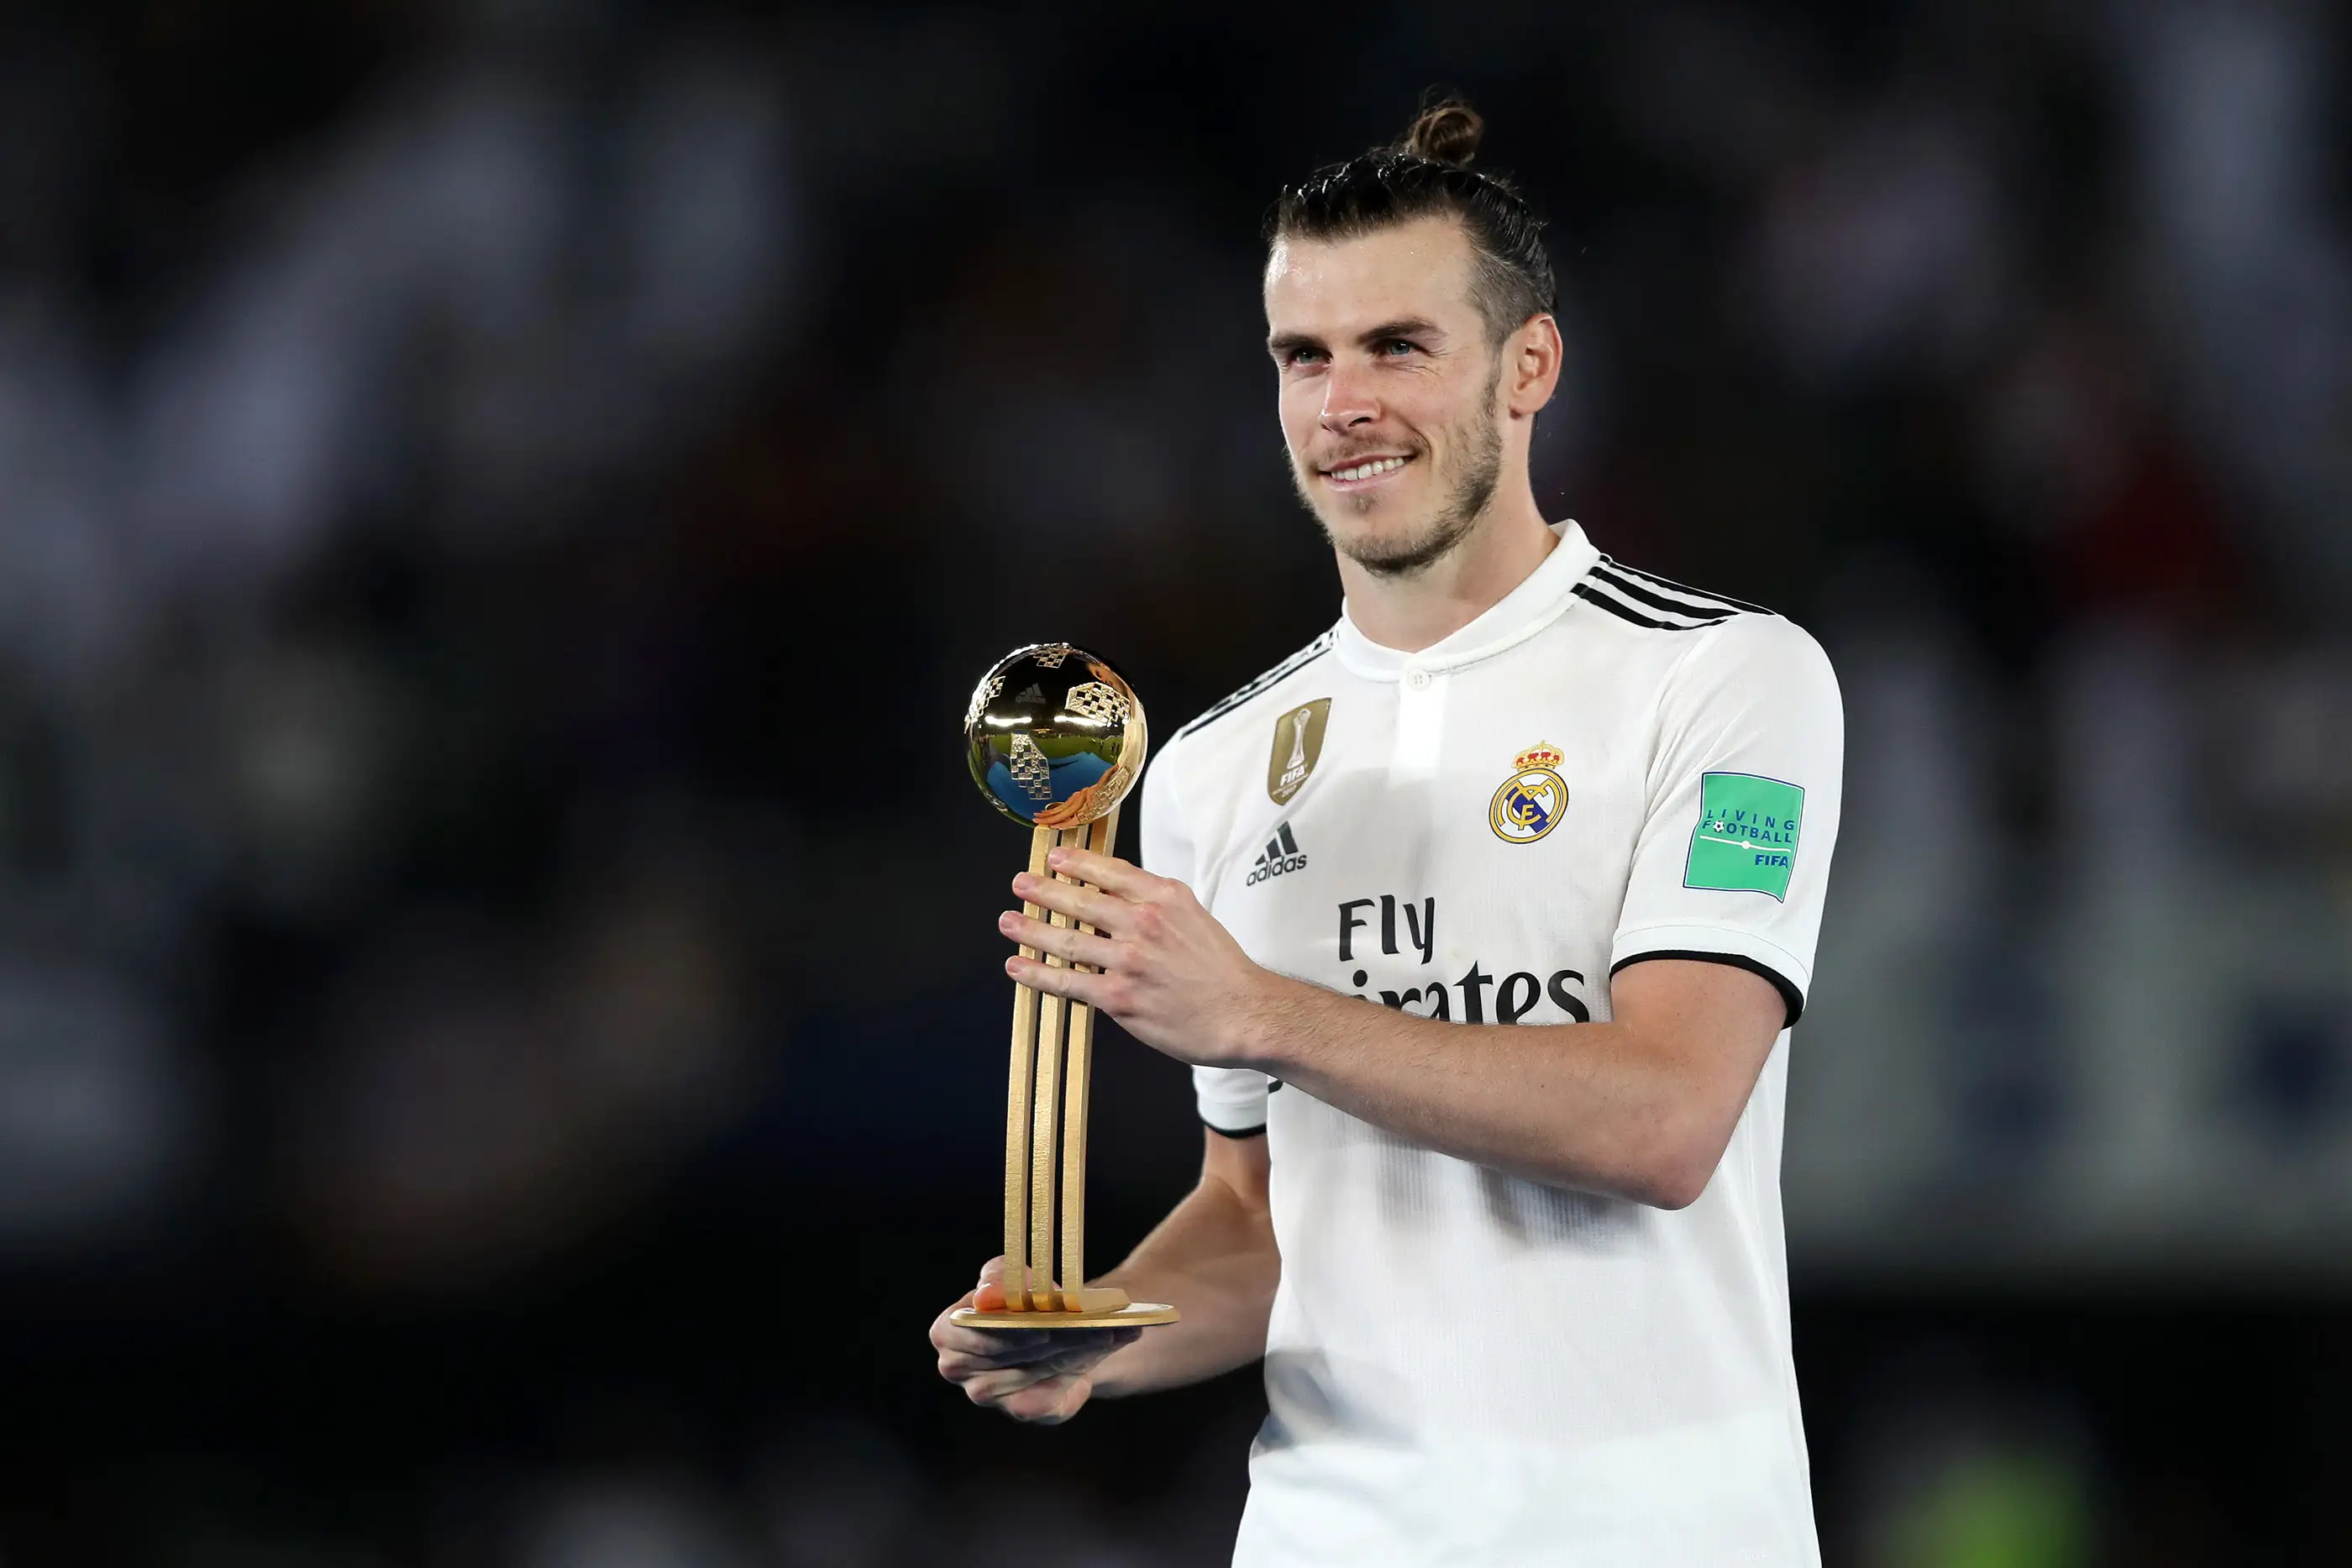 Gareth Bale of Real Madrid poses with his Adidas Golden Ball award after the FIFA Club World Cup UAE 2018 Final between Al Ain and Real Madrid at the Zayed Sports City Stadium on December 22, 2018 in Abu Dhabi, United Arab Emirates.